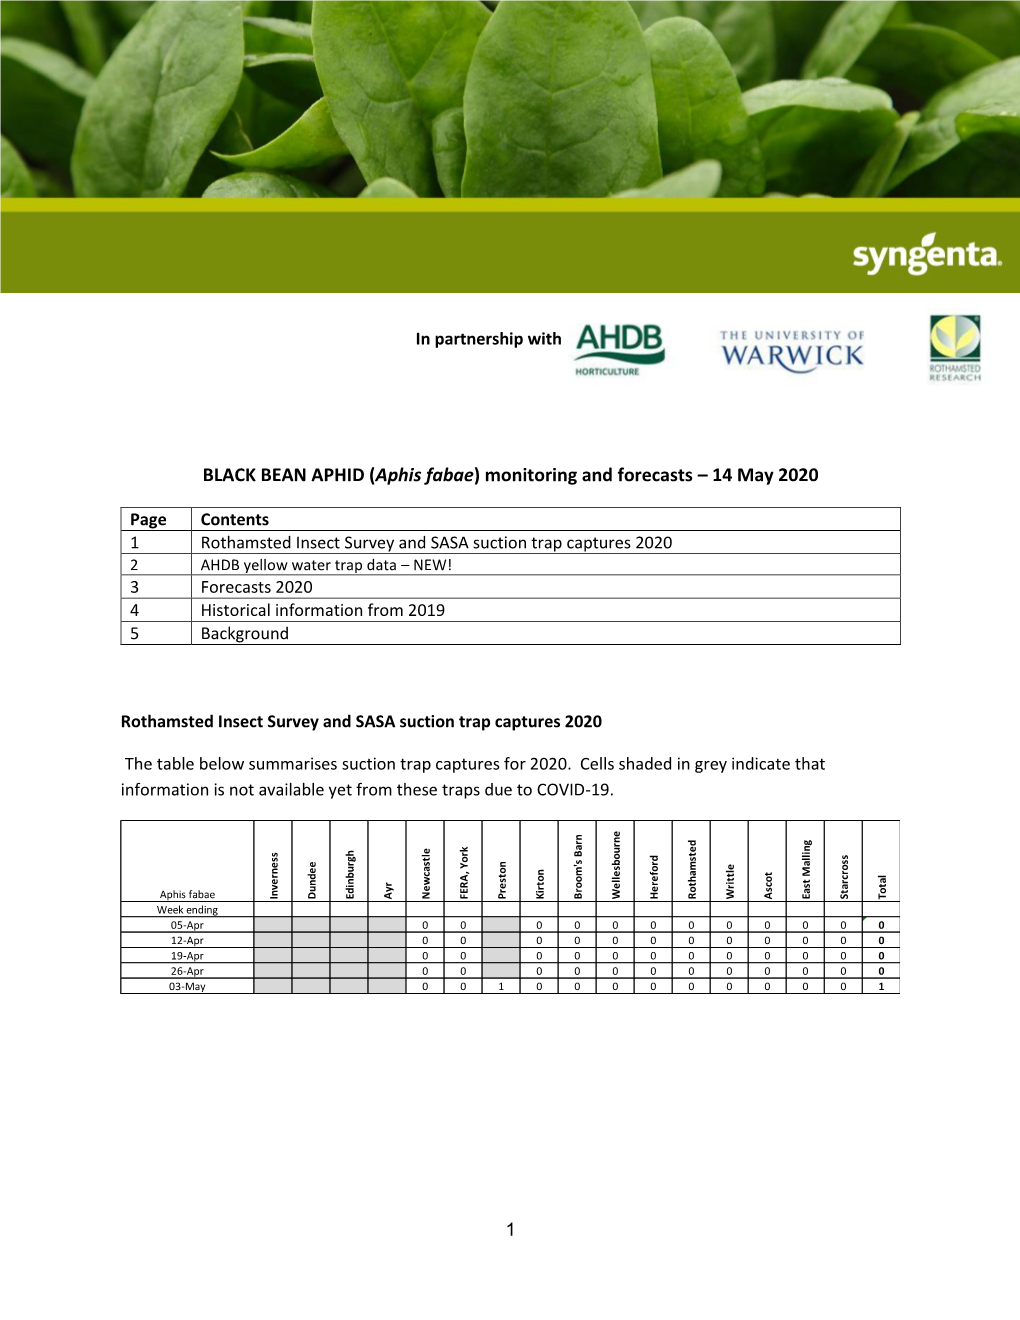 BLACK BEAN APHID (Aphis Fabae) Monitoring and Forecasts – 14 May 2020